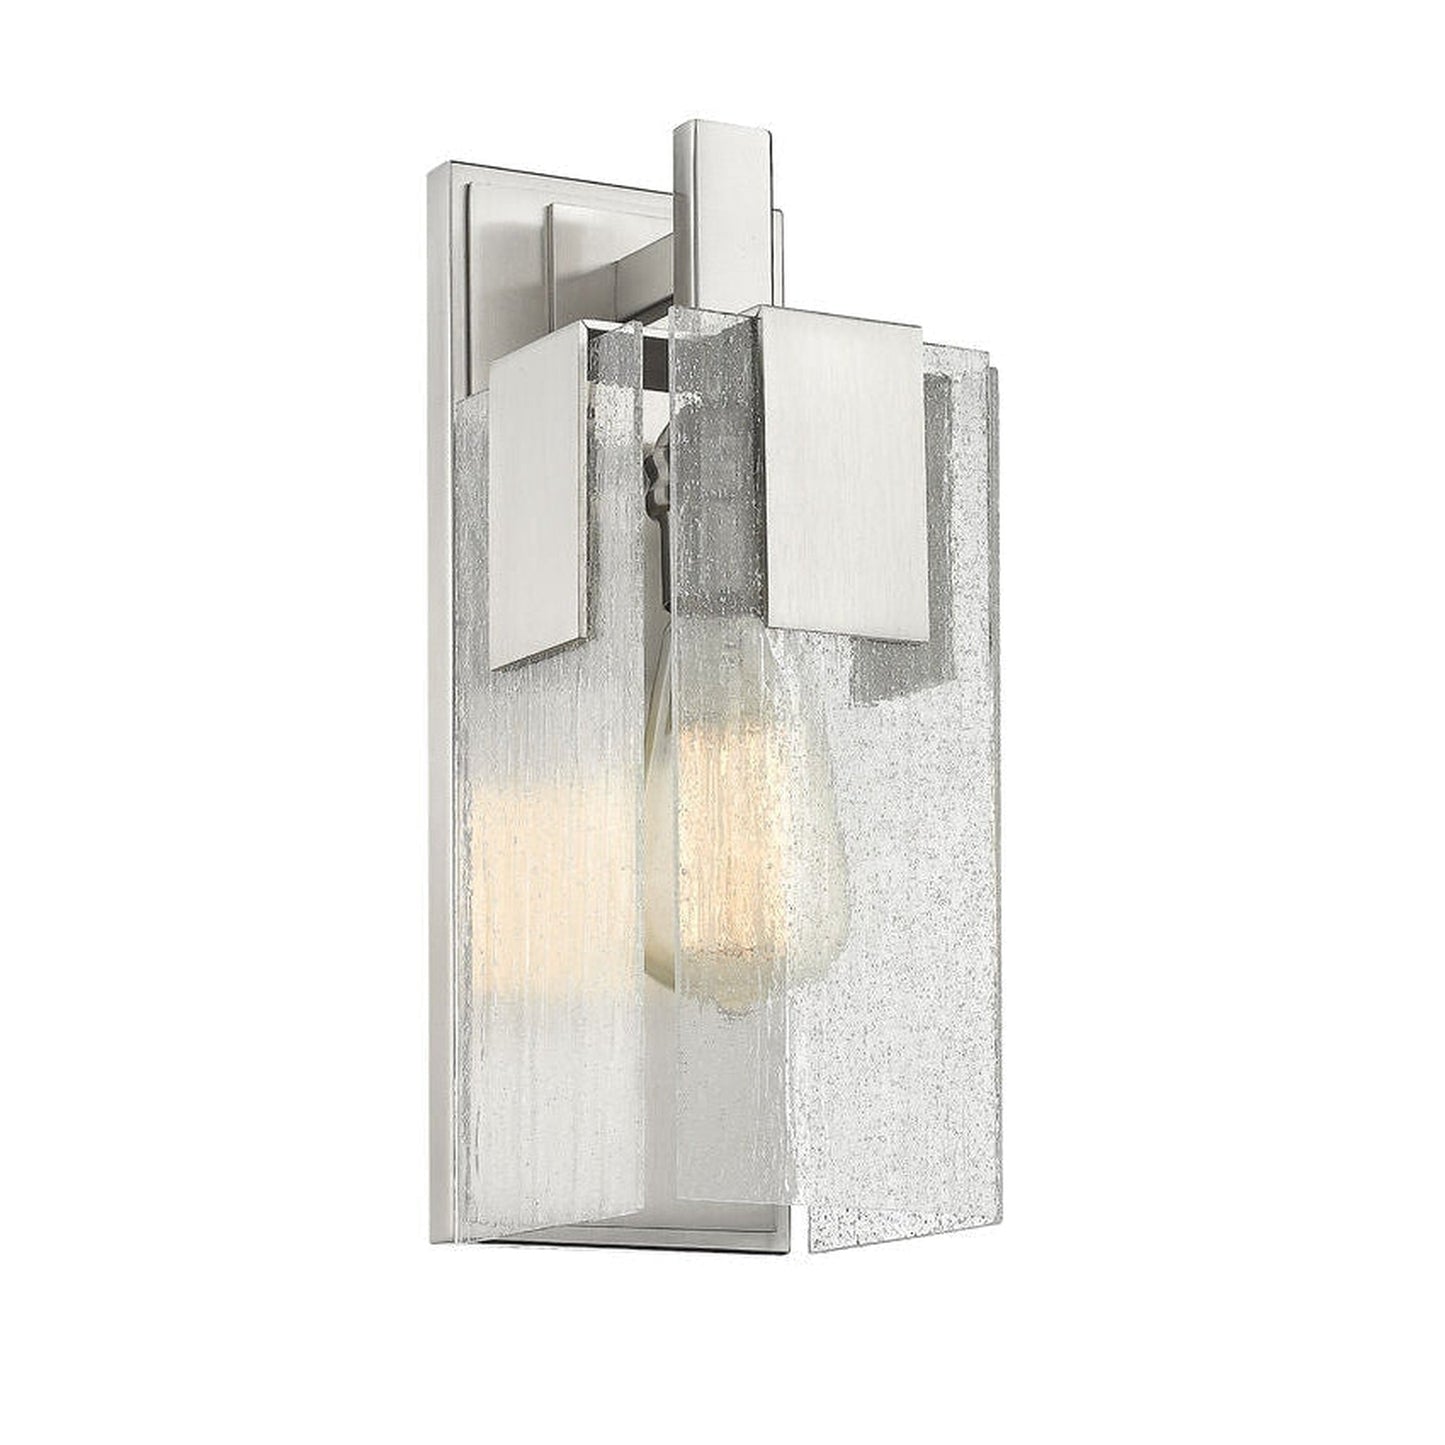 Z-Lite Gantt 5" 1-Light Brushed Nickel Wall Sconce With Seedy Glass Shade